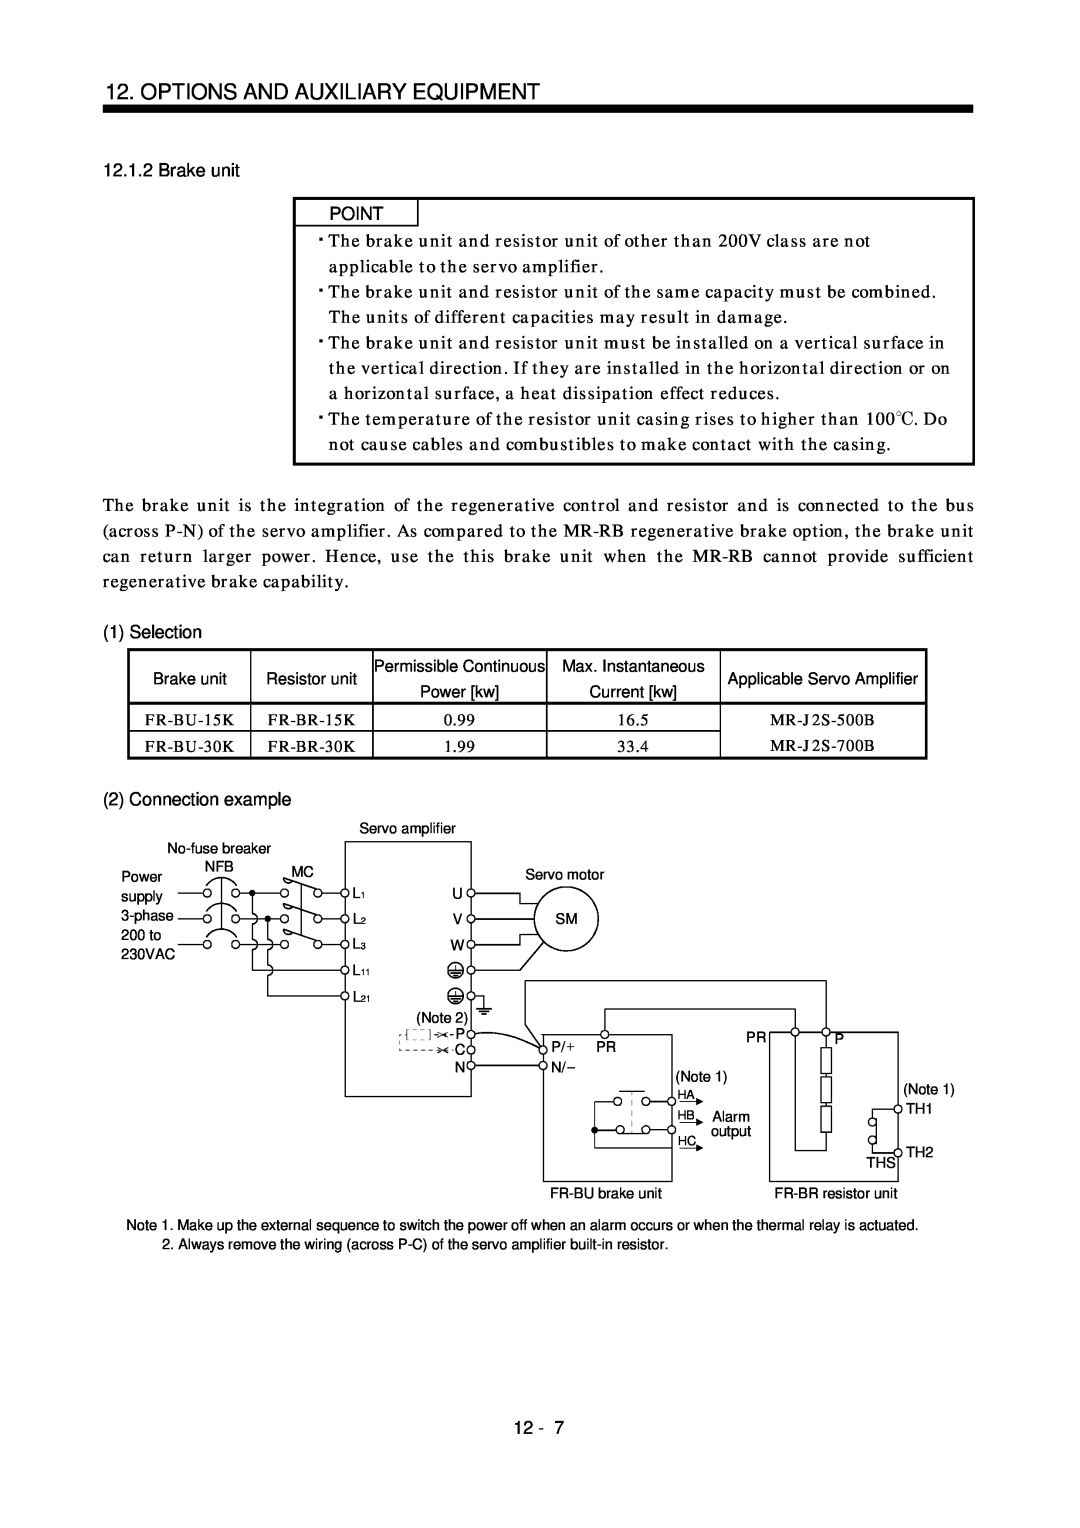 Bose MR-J2S- B Brake unit POINT, Selection, Connection example, Options And Auxiliary Equipment, 12, FR-BR-15K, FR-BR-30K 